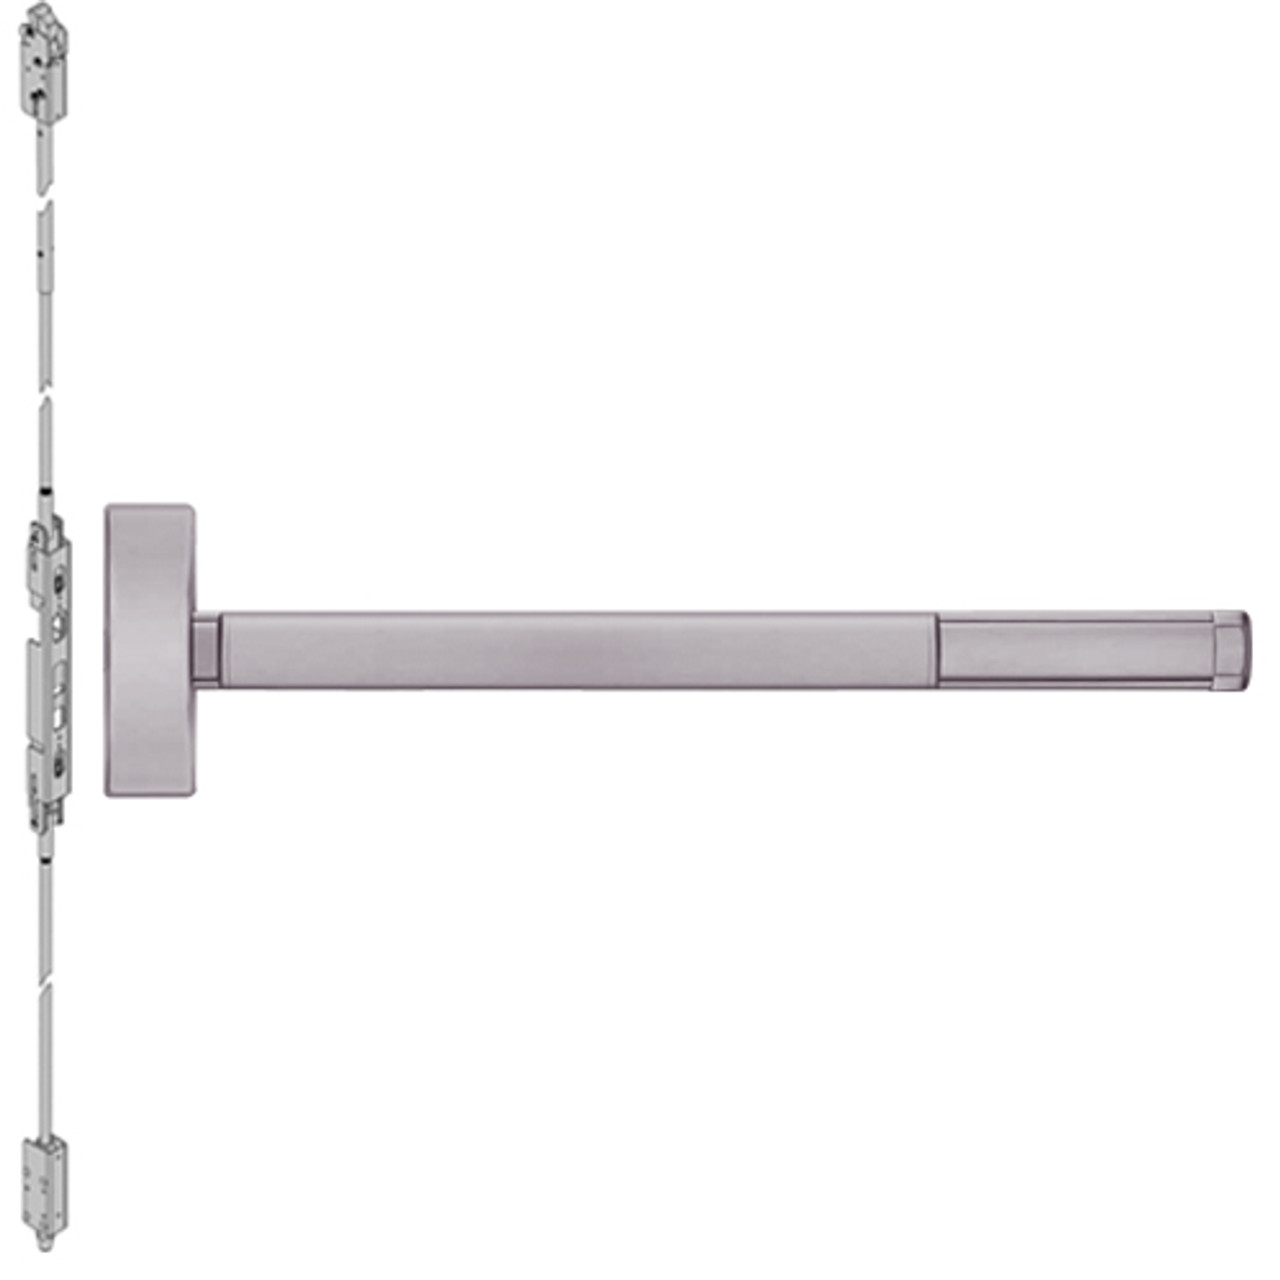 2803CD-630-48 PHI 2800 Series Non Fire Rated Concealed Vertical Rod Exit Device Prepped for Key Retracts Latchbolt in Satin Stainless Steel Finish